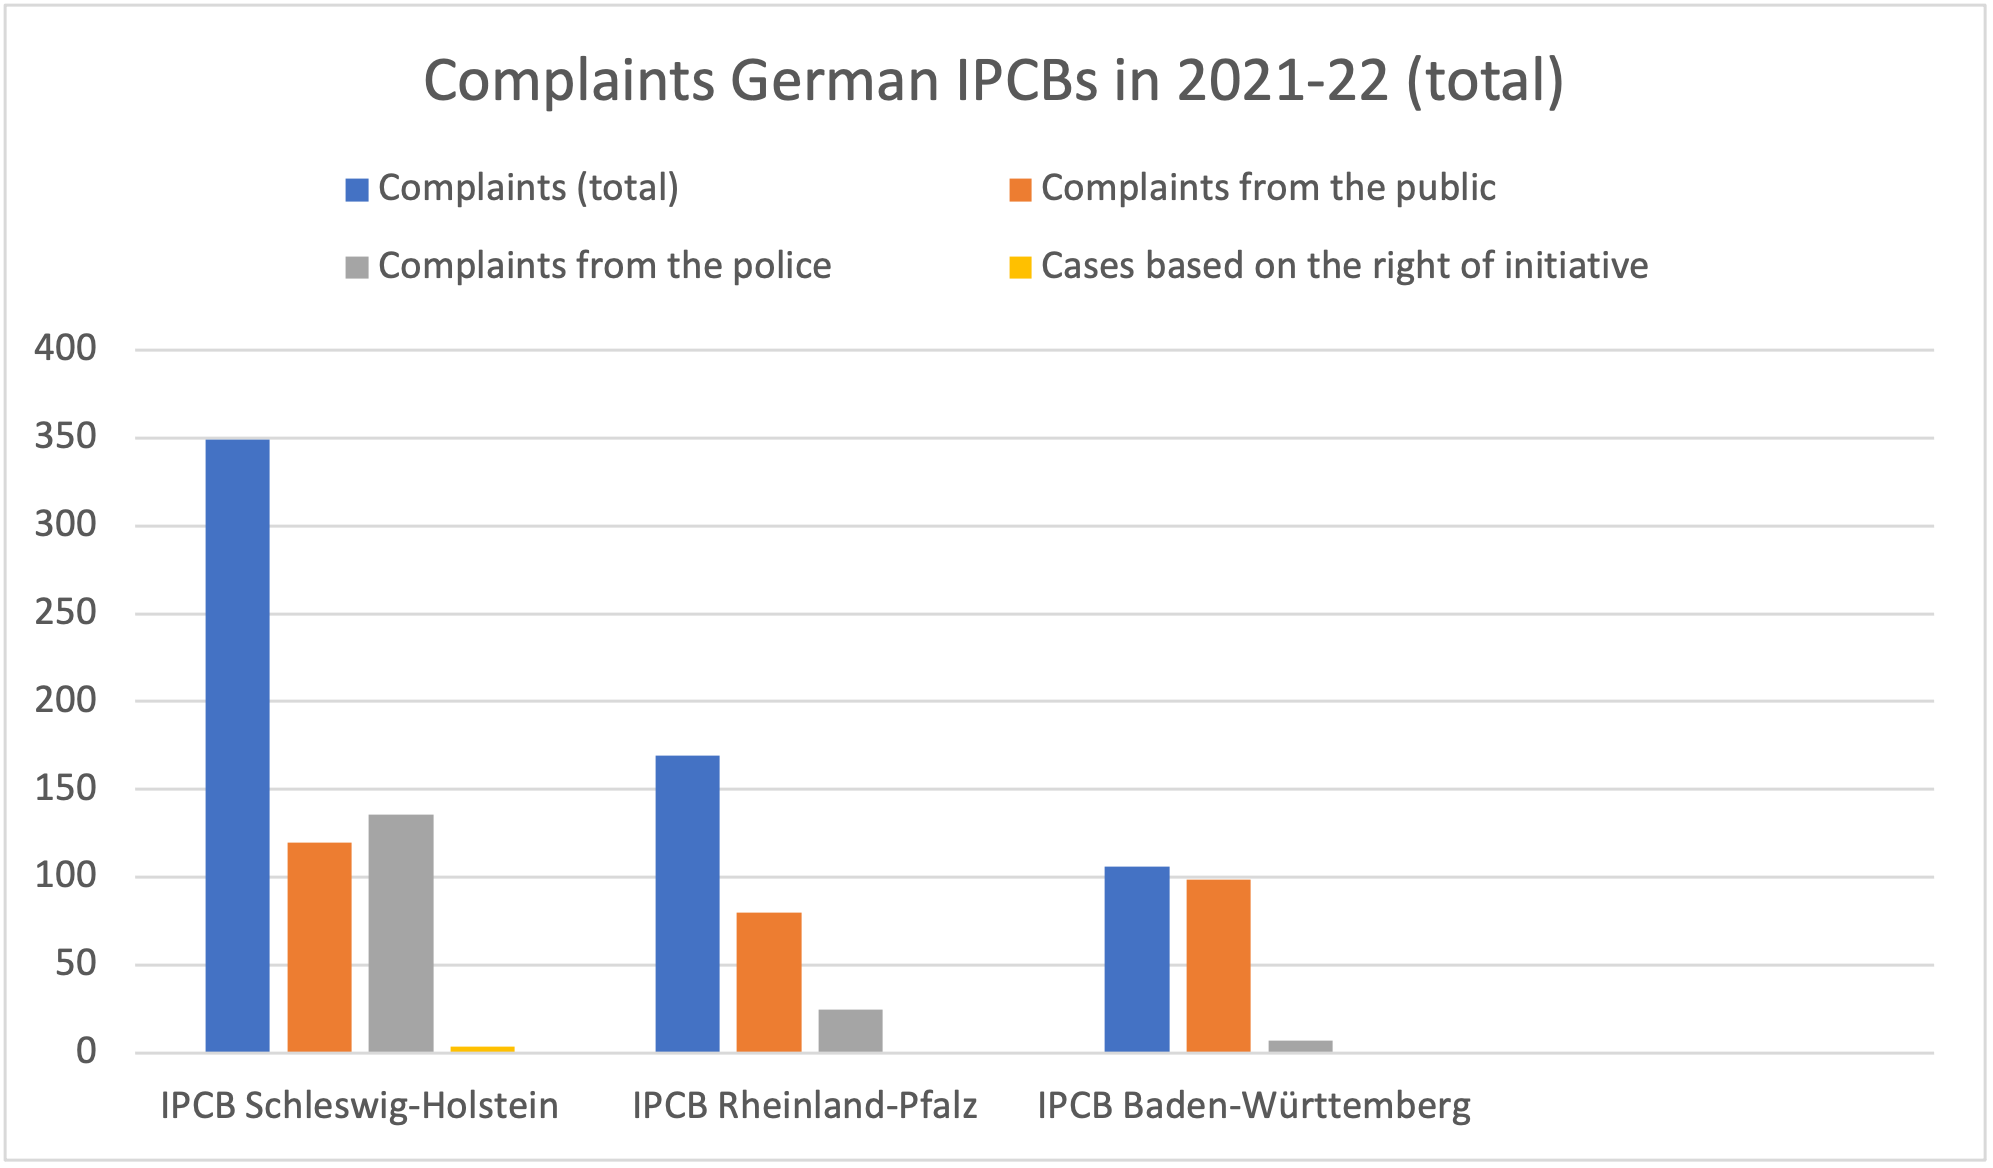 Germany InfoGraphic 1 - Total complaints in selected German IPCBs in 2021-22